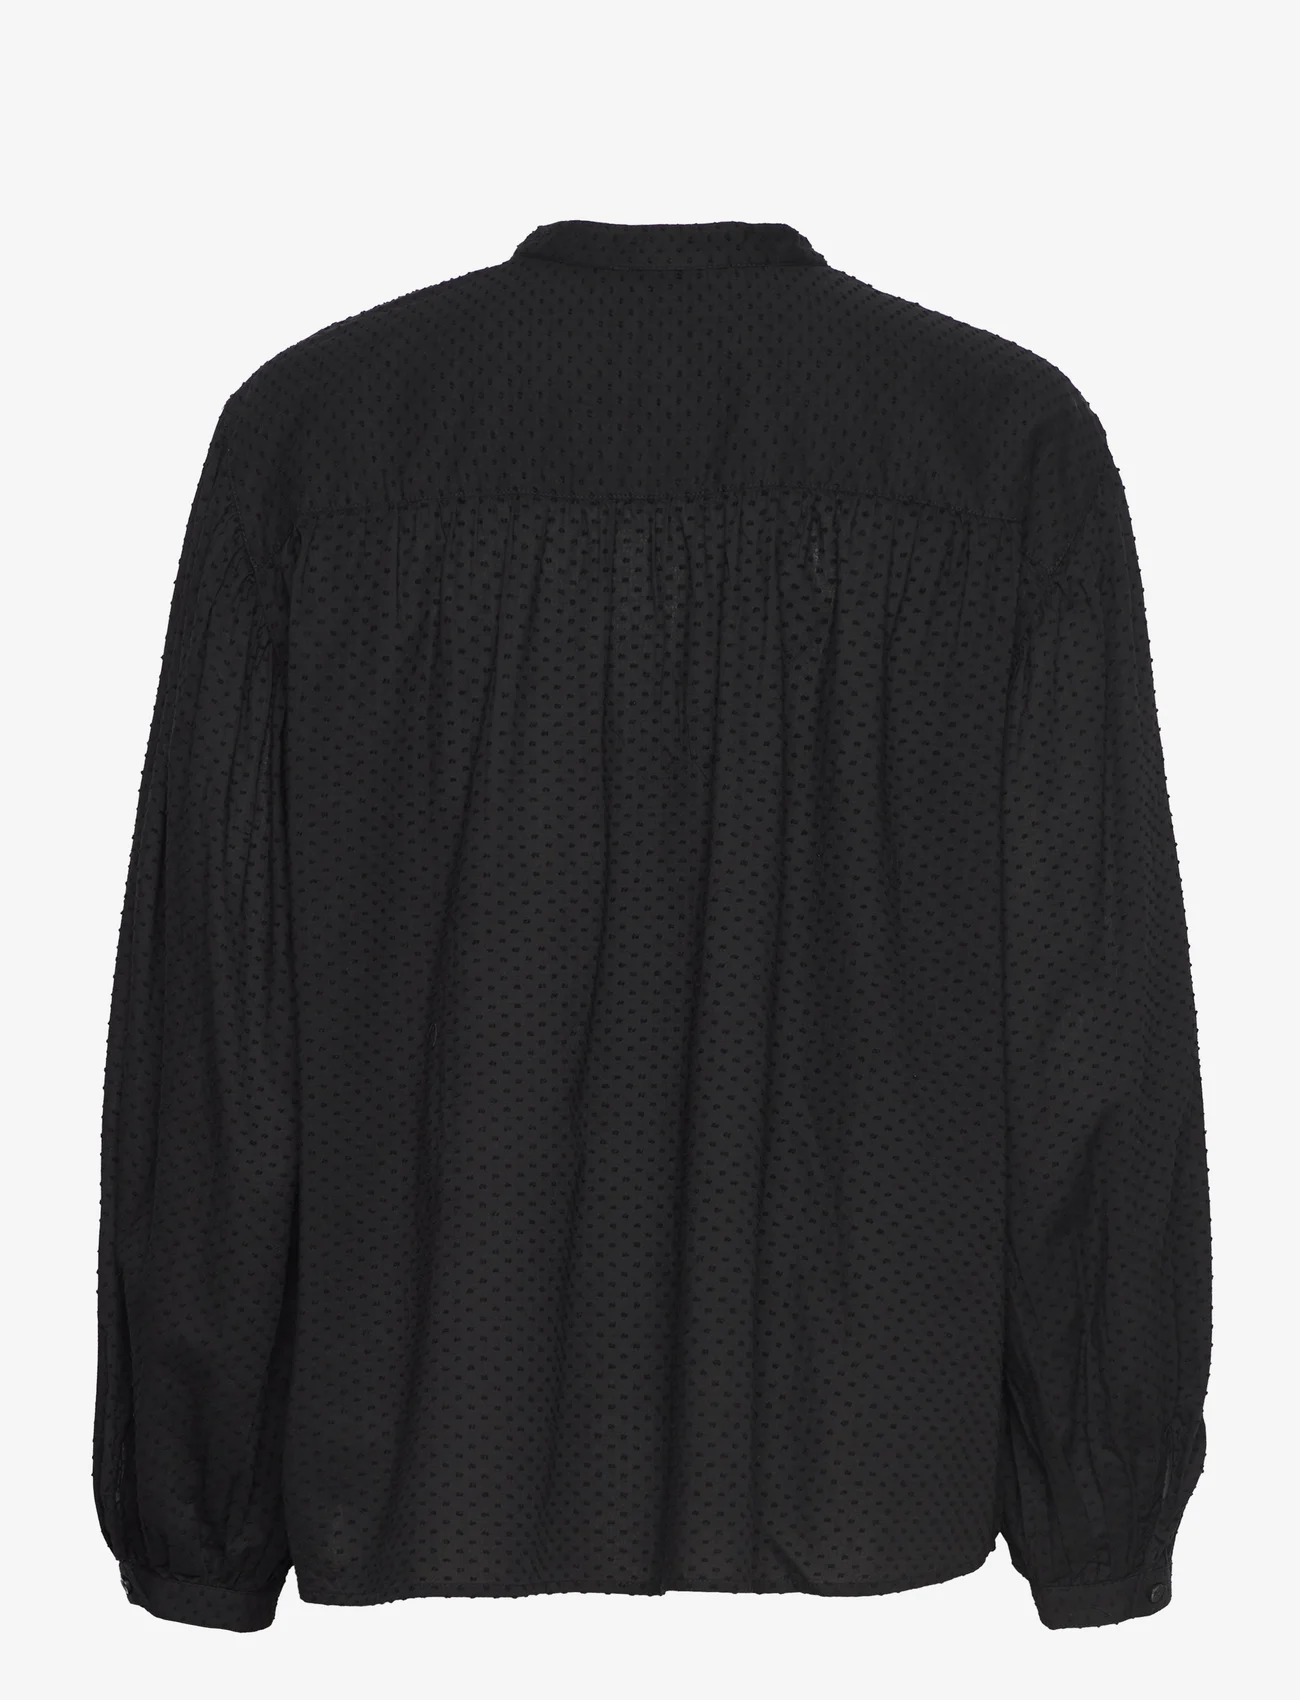 Esprit Casual - Dobby texture blouse - long-sleeved blouses - black - 1